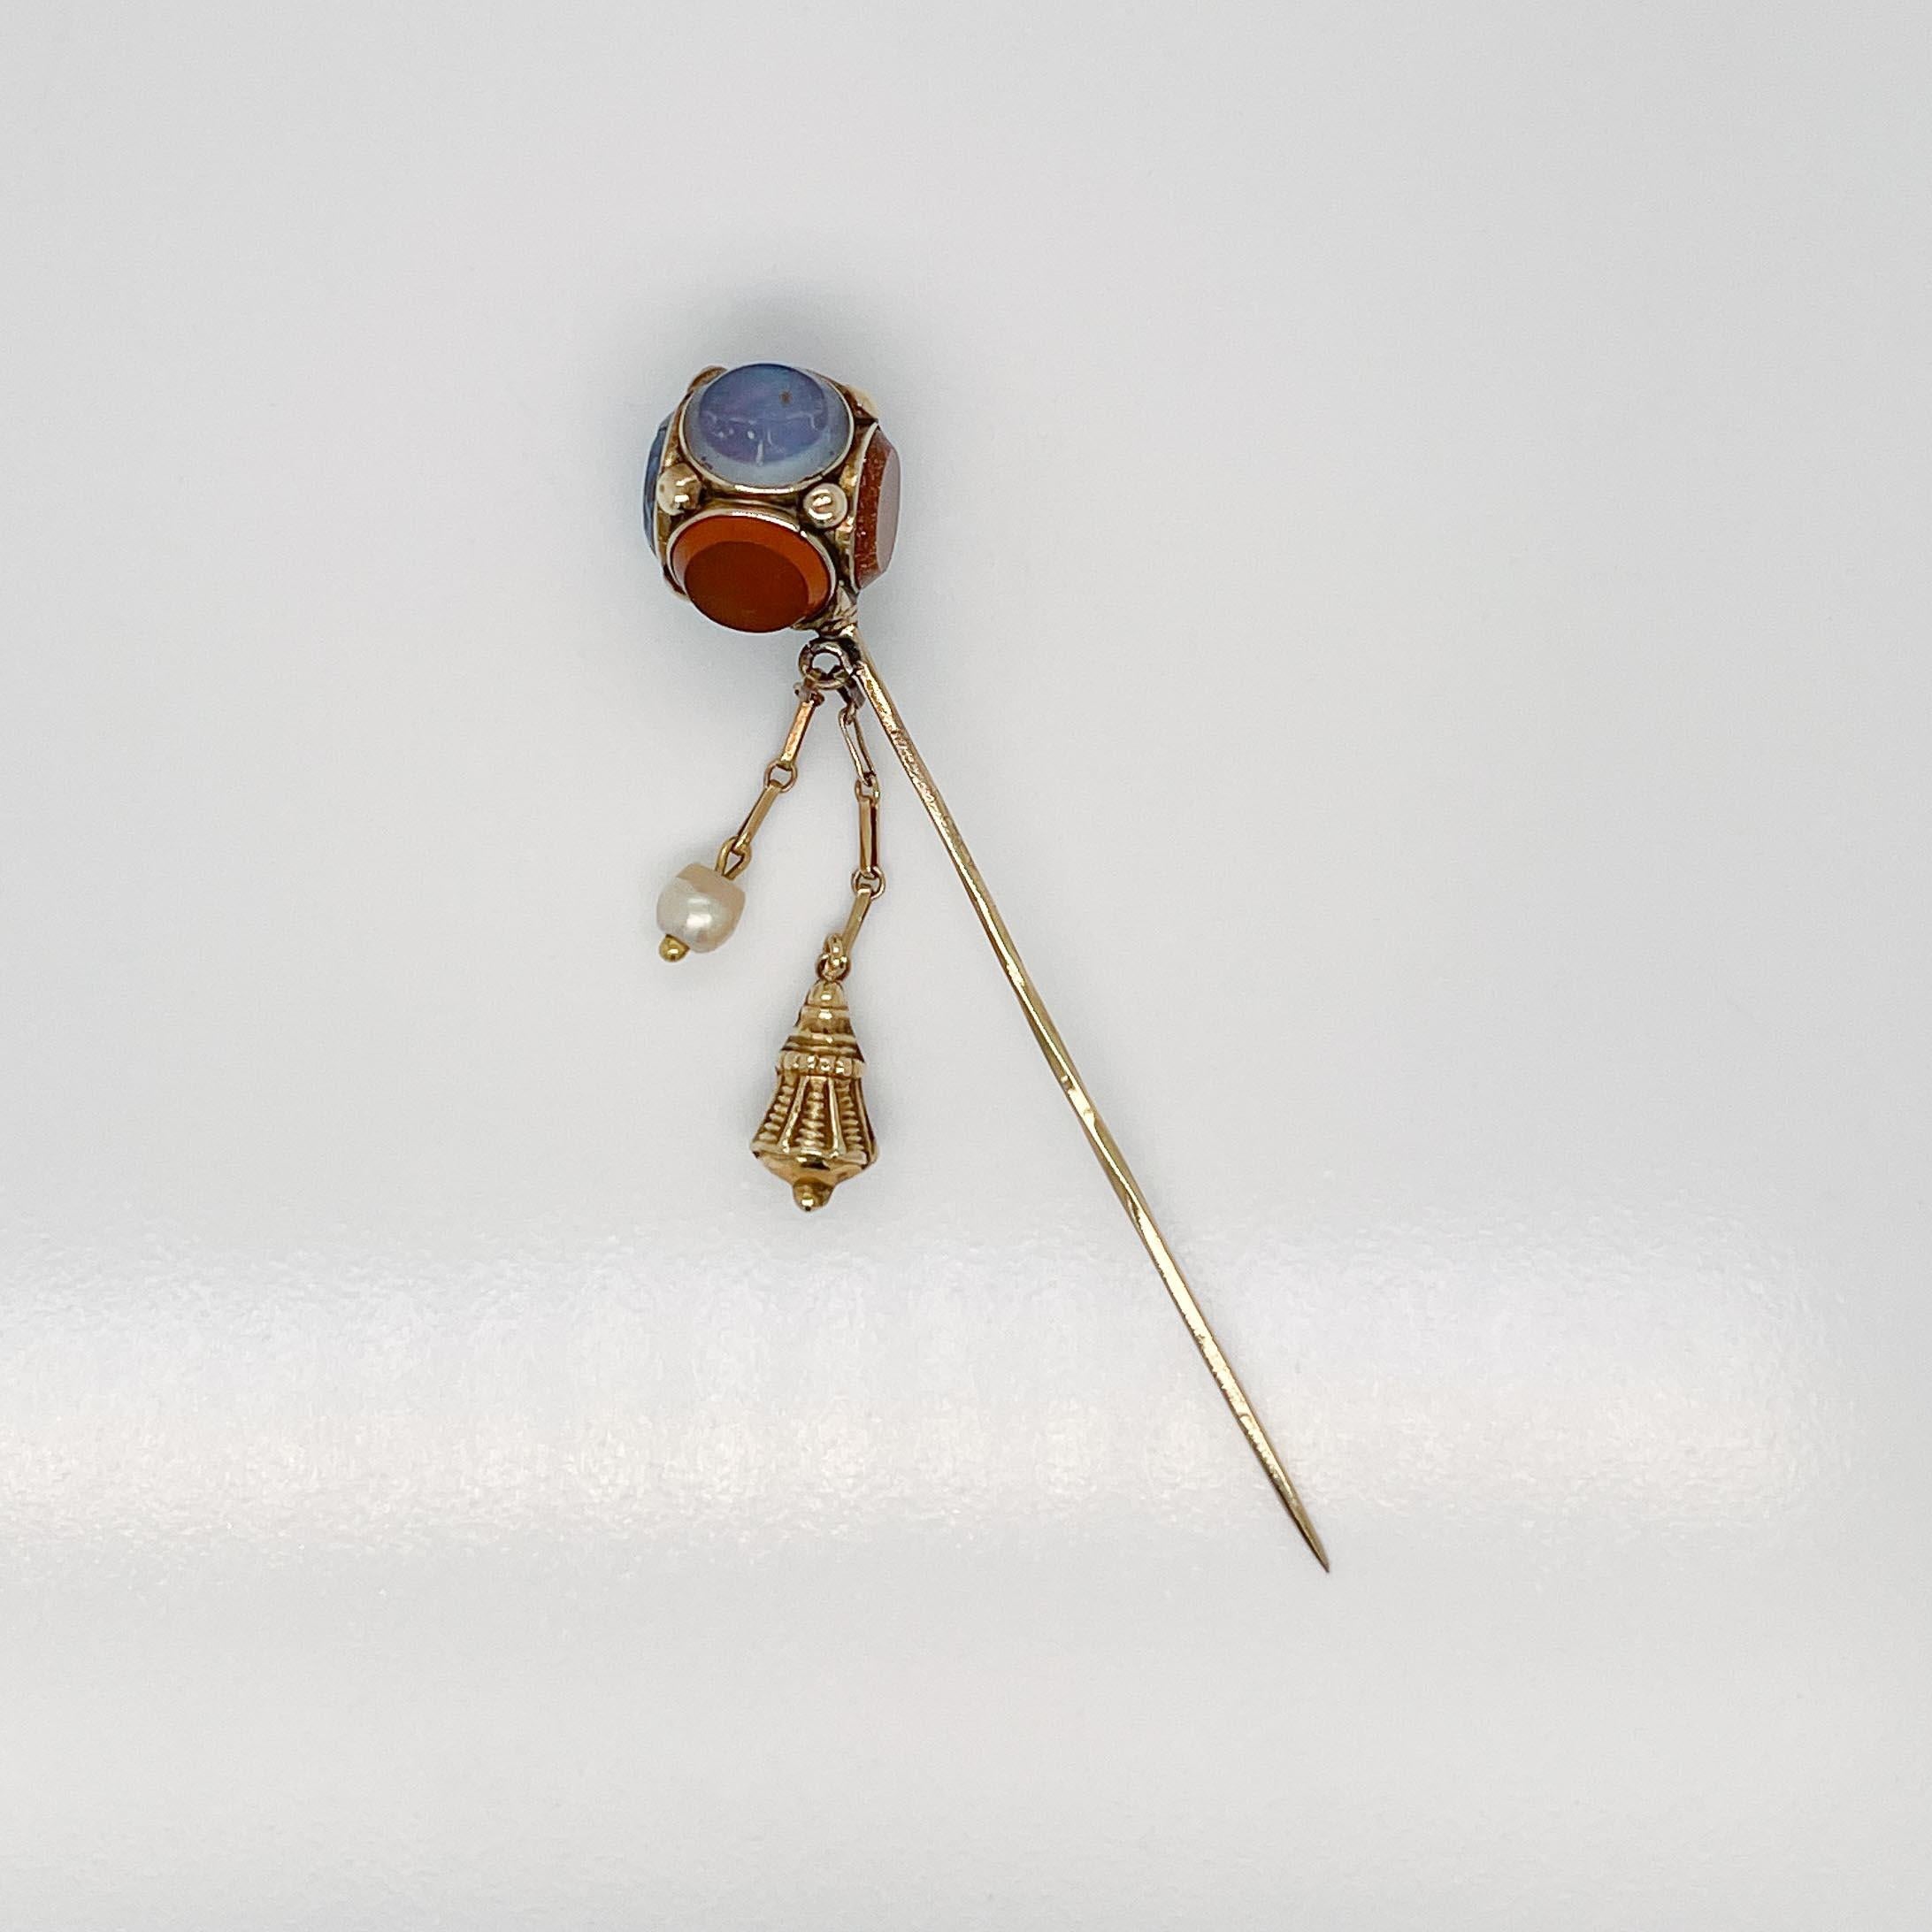 A fine Victorian Scottish stickpin.

With flat, round agate cabochons bezel set in 14k gold cube-shaped top.  

A decorative gold charm and pearl are suspended from the top. 

The pin shaft has a little twist in center of pin.

Simply a eye-catching